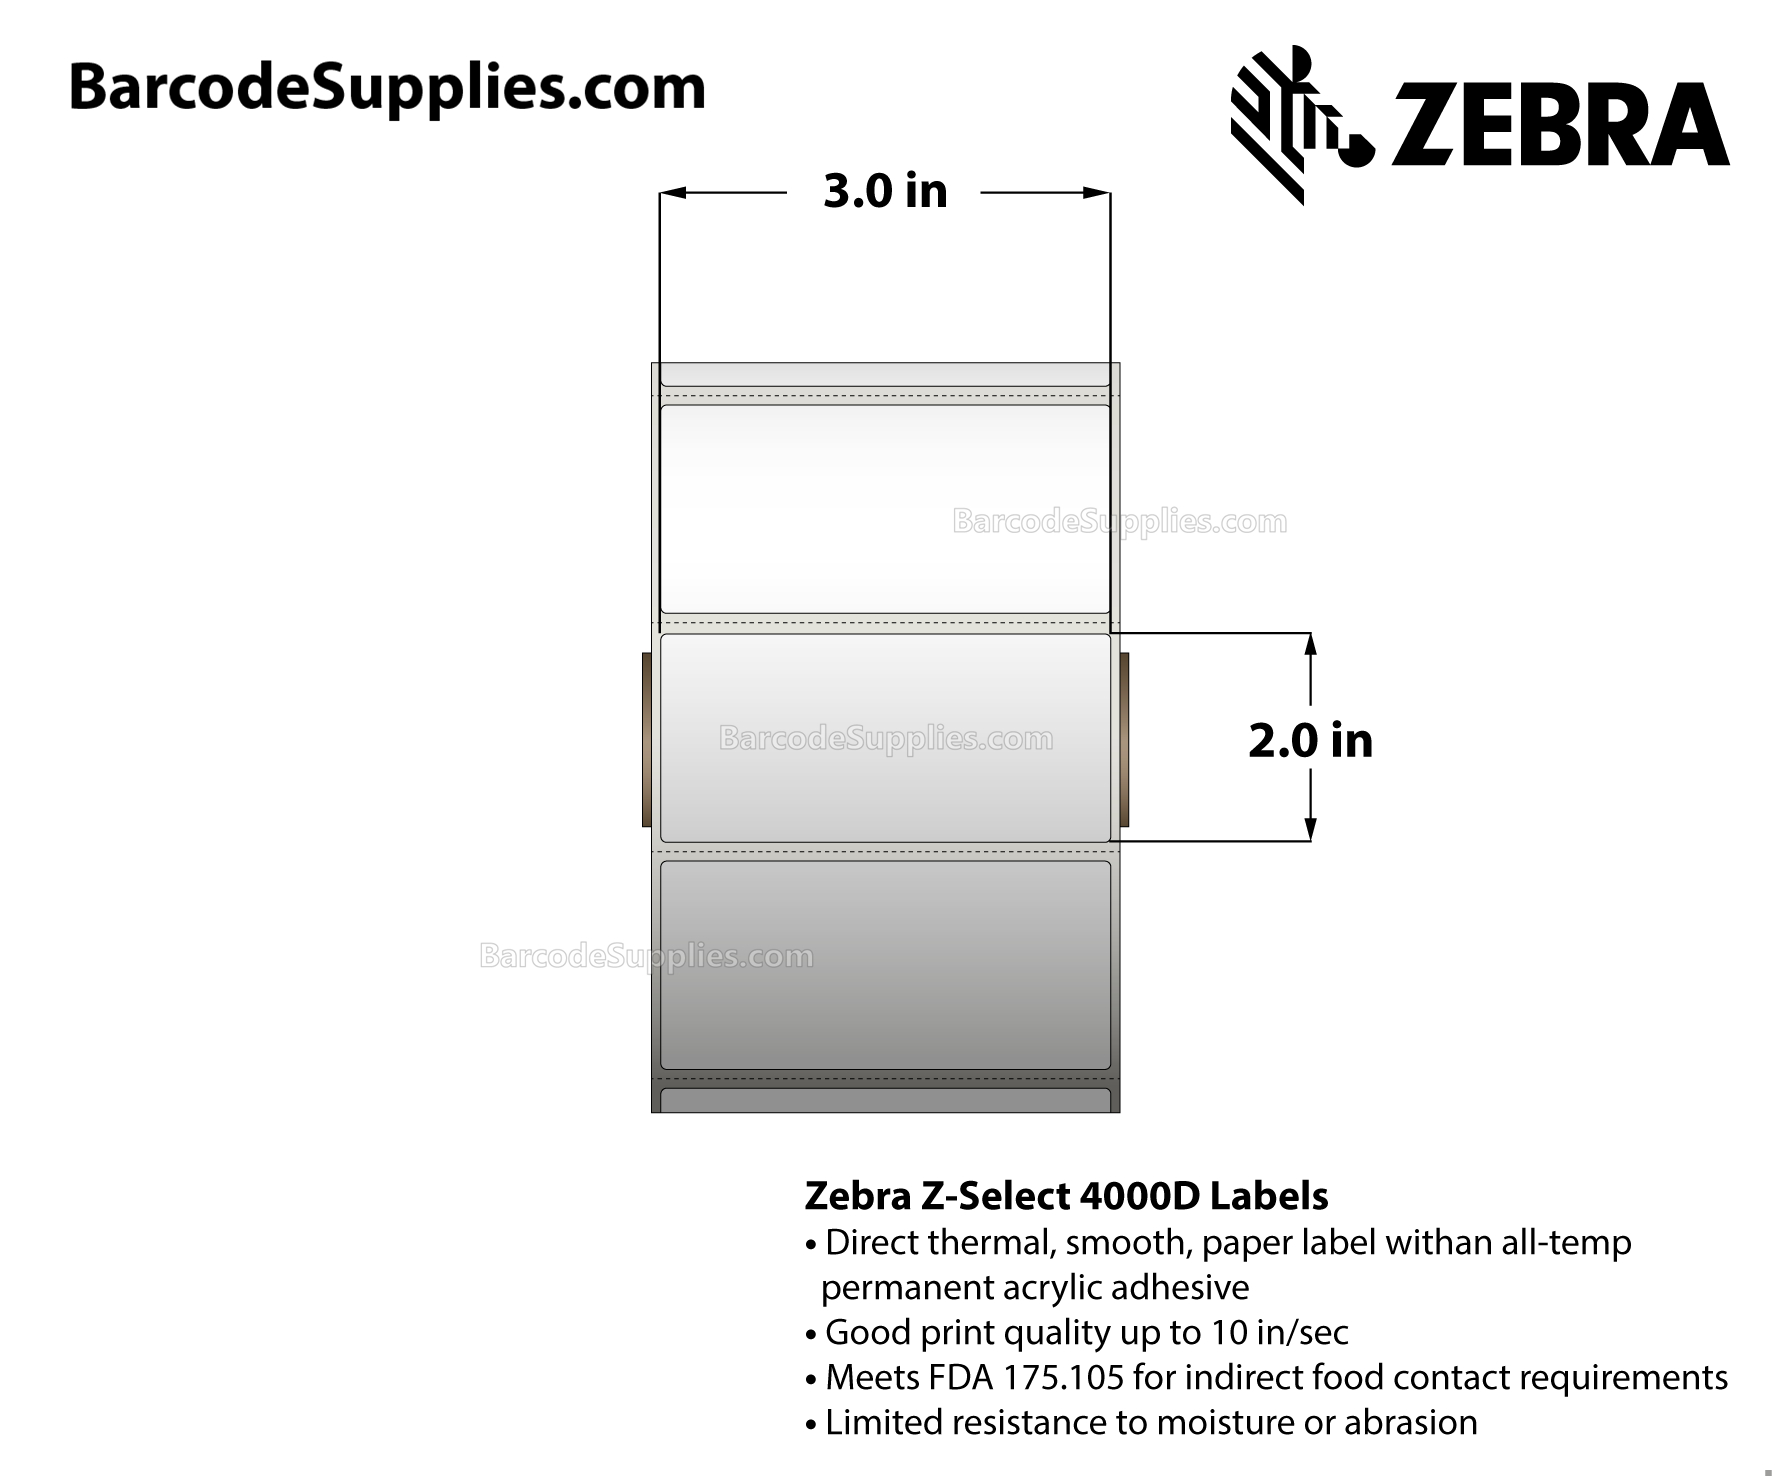 3 x 2 Direct Thermal White Z-Select 4000D Labels With All-Temp Adhesive - Perforated - 1240 Labels Per Roll - Carton Of 6 Rolls - 7440 Labels Total - MPN: 10010044